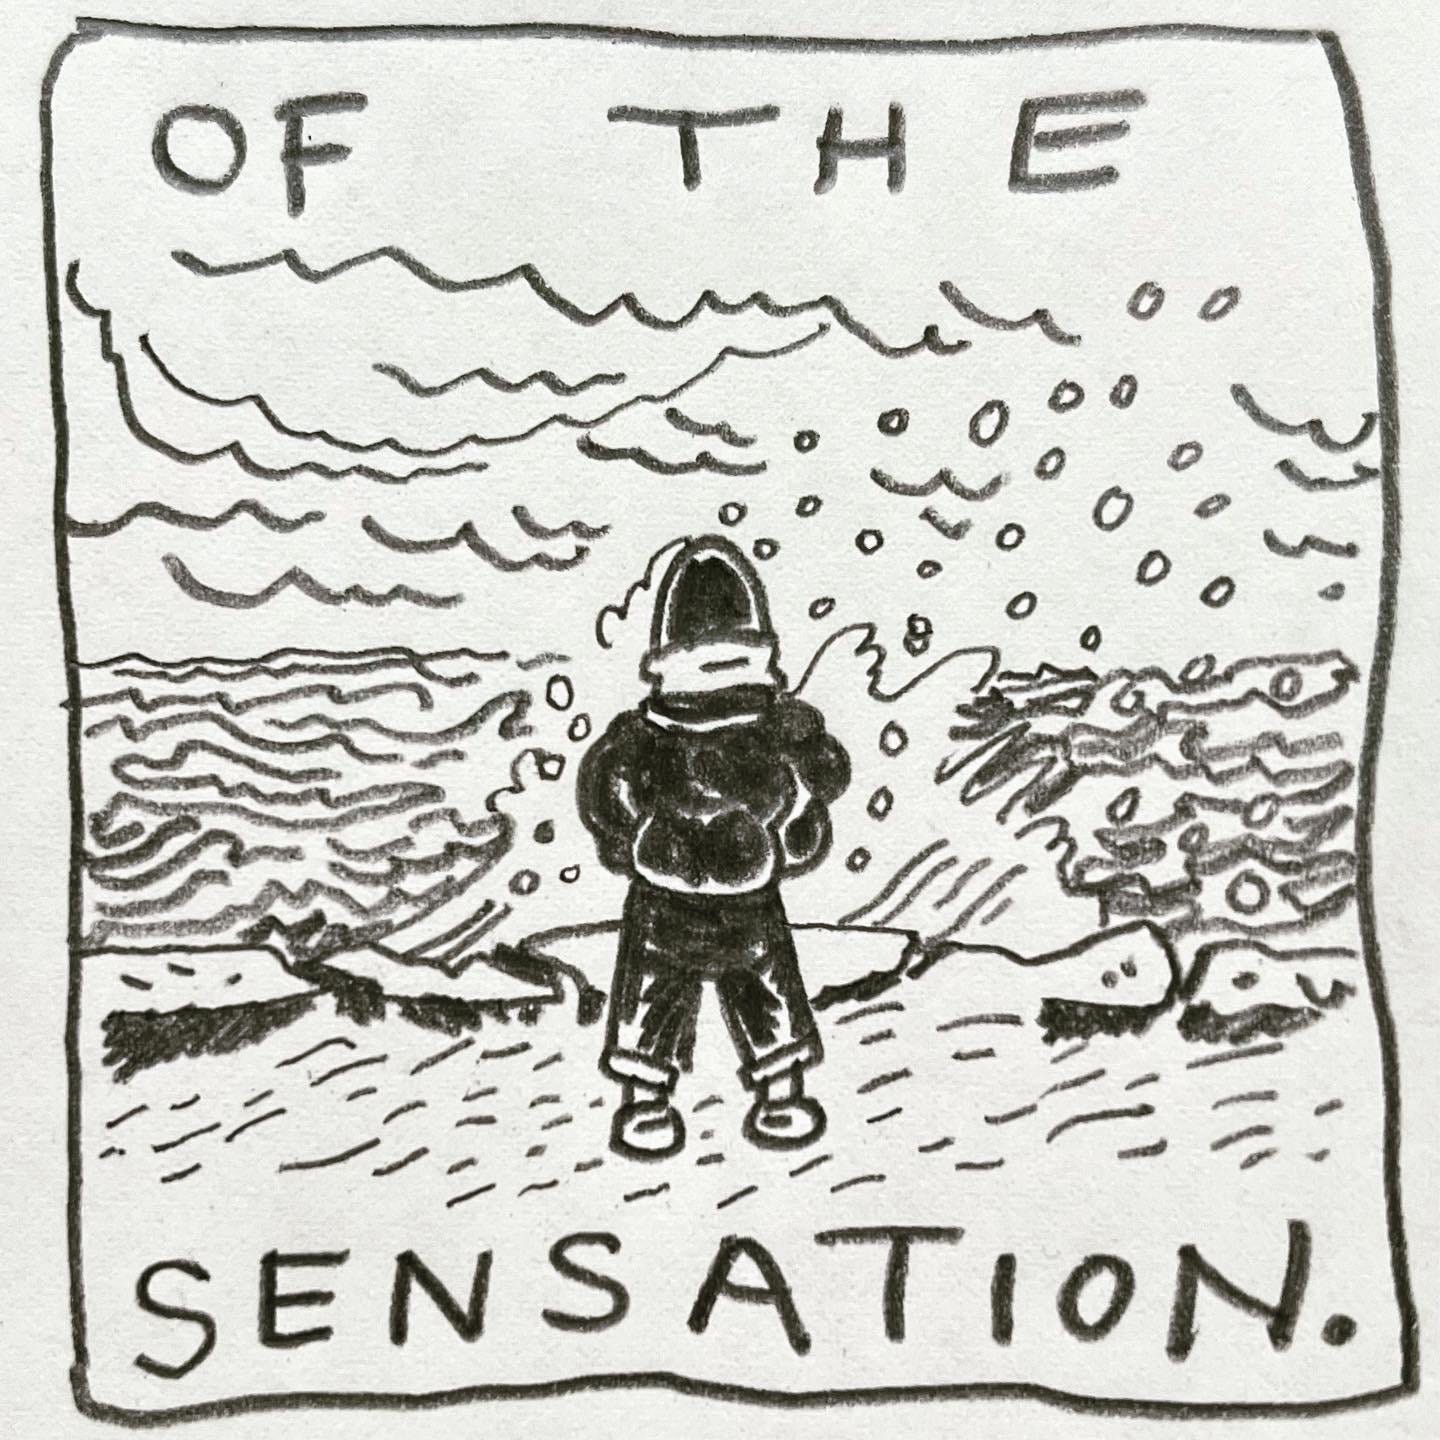 Panel 4: of the sensation. Image: we see Lark's back. They are standing in front of a row of boulders, the lake behind. Heavy clouds hang in the sky. A wave is crashing up against the rocks, moving with the wind, spraying foam.